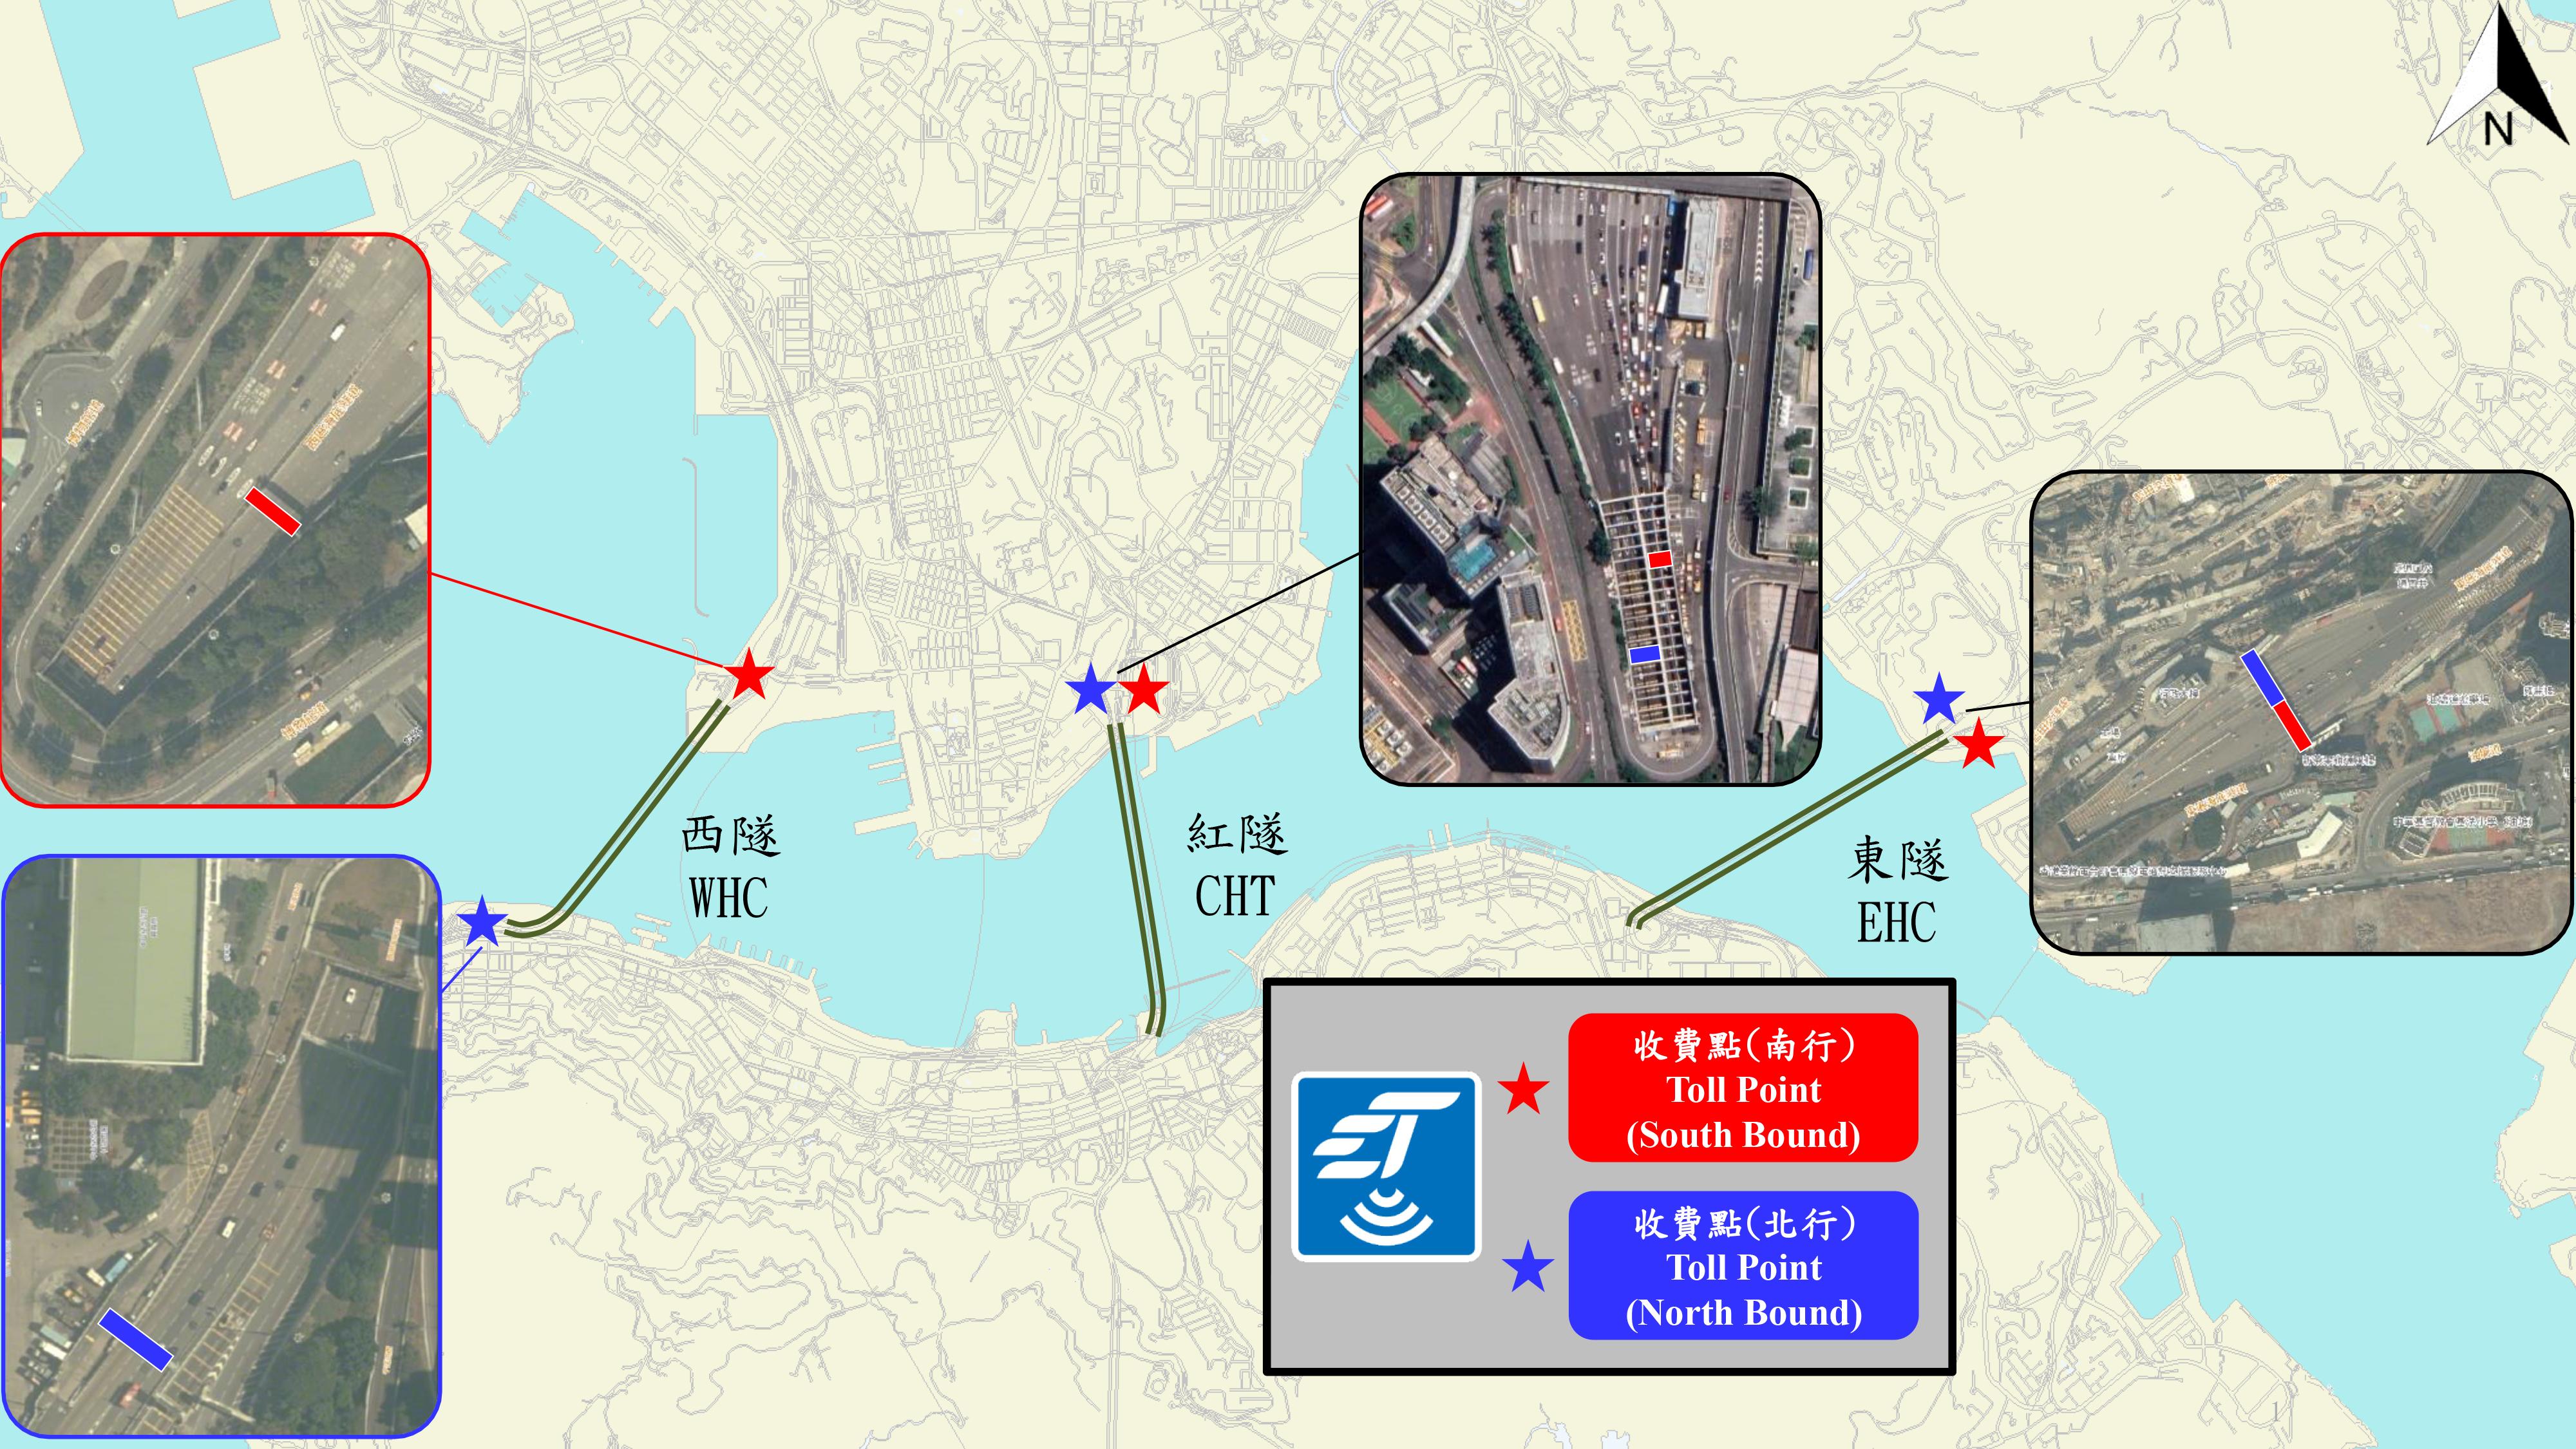 The Transport Department said today (December 7) that new toll information displays have been installed at/near the existing toll points of HKeToll in both directions of the three road harbour crossings. Photo shows the locations of the toll points.